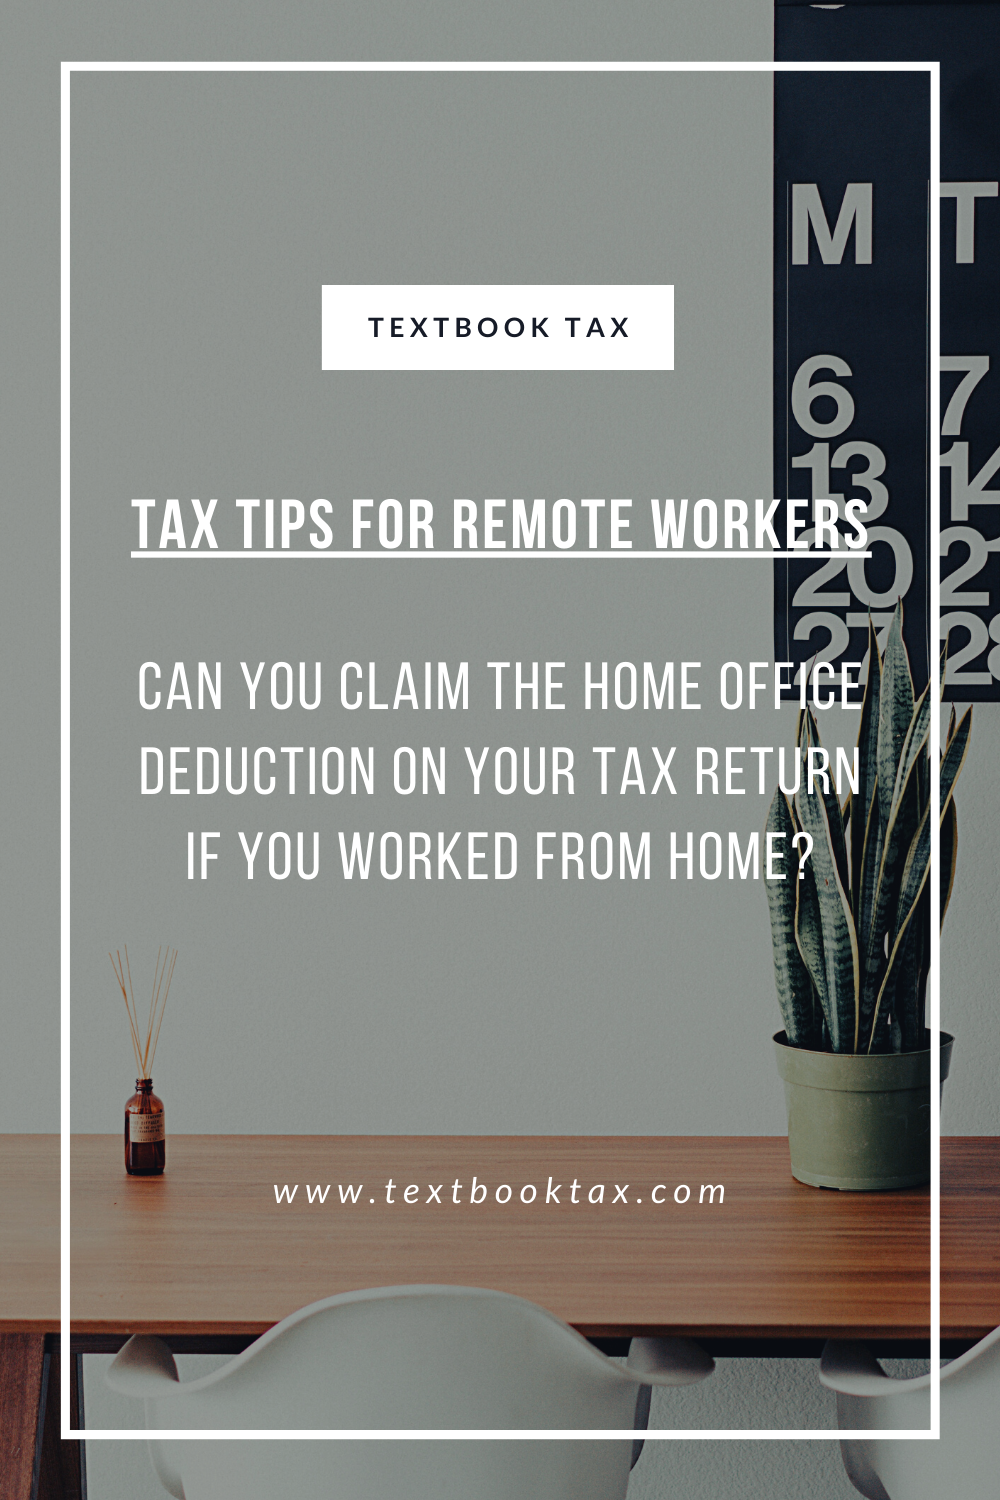 Tax Tips for Remote Workers: Can you claim the home office deduction on